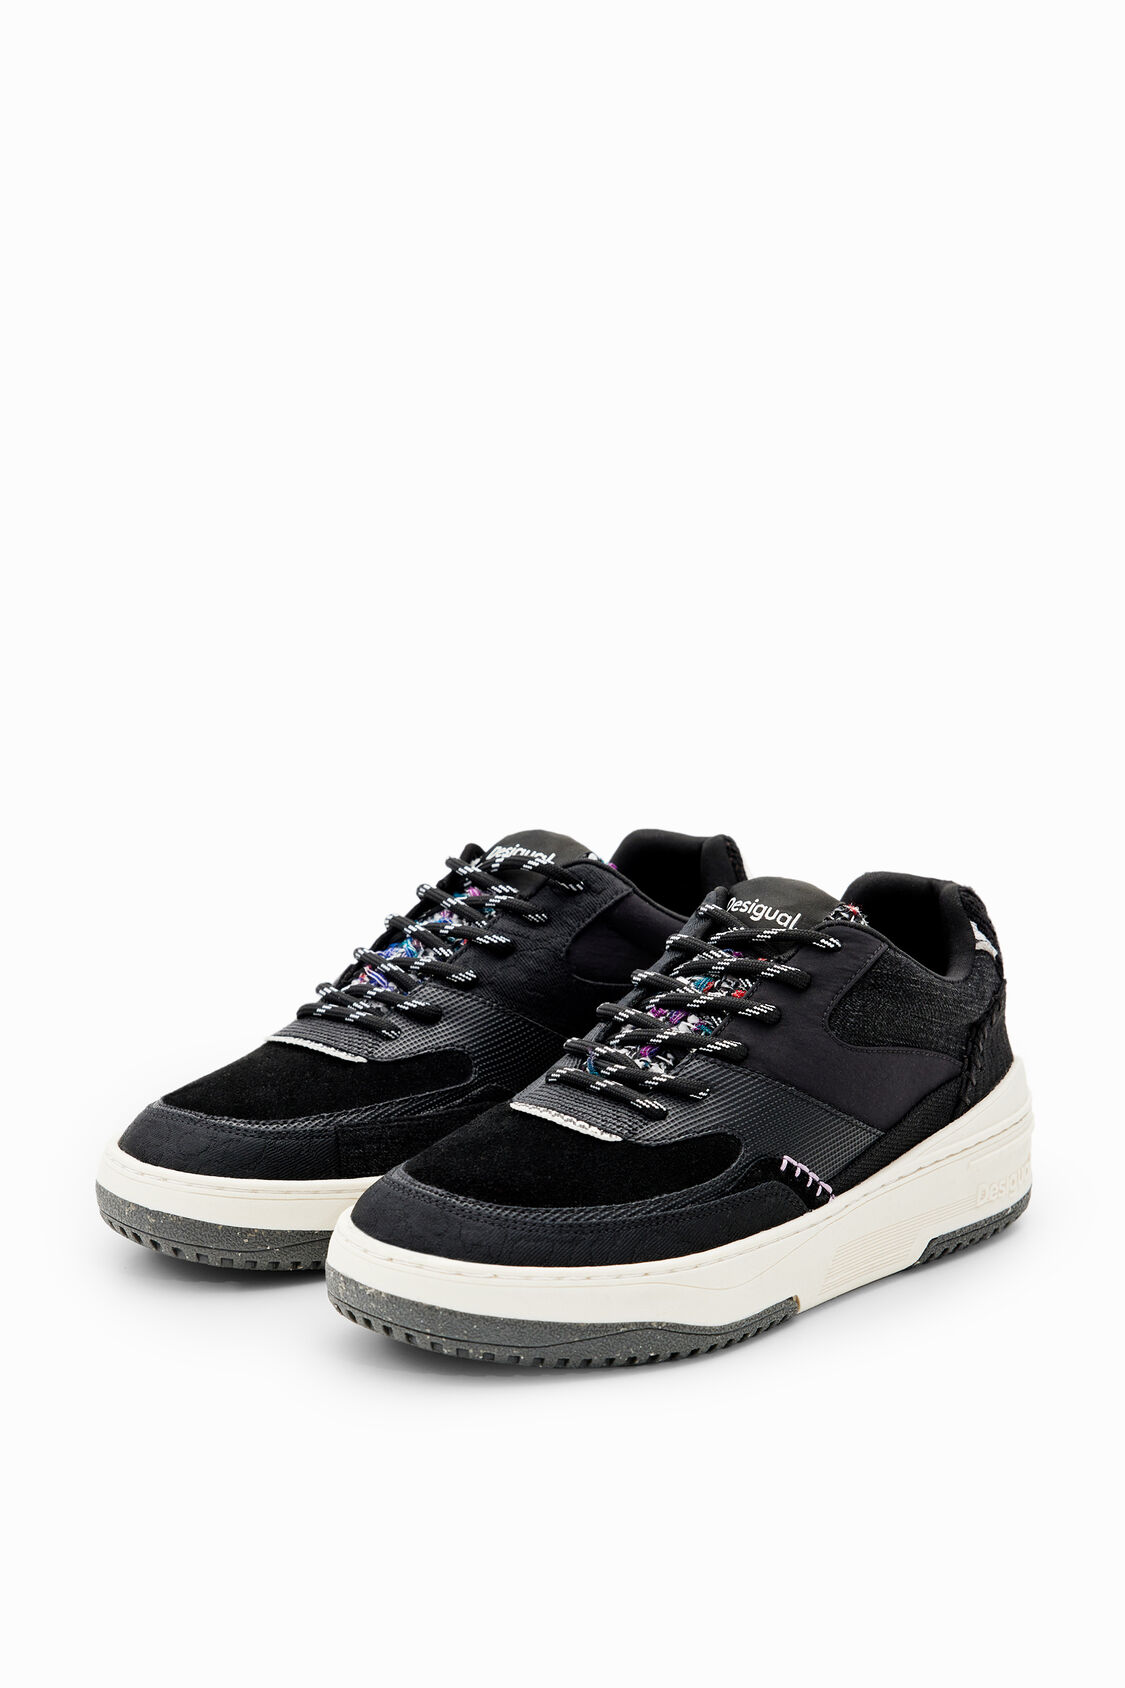 Sneakers retro chunky patch de mujer